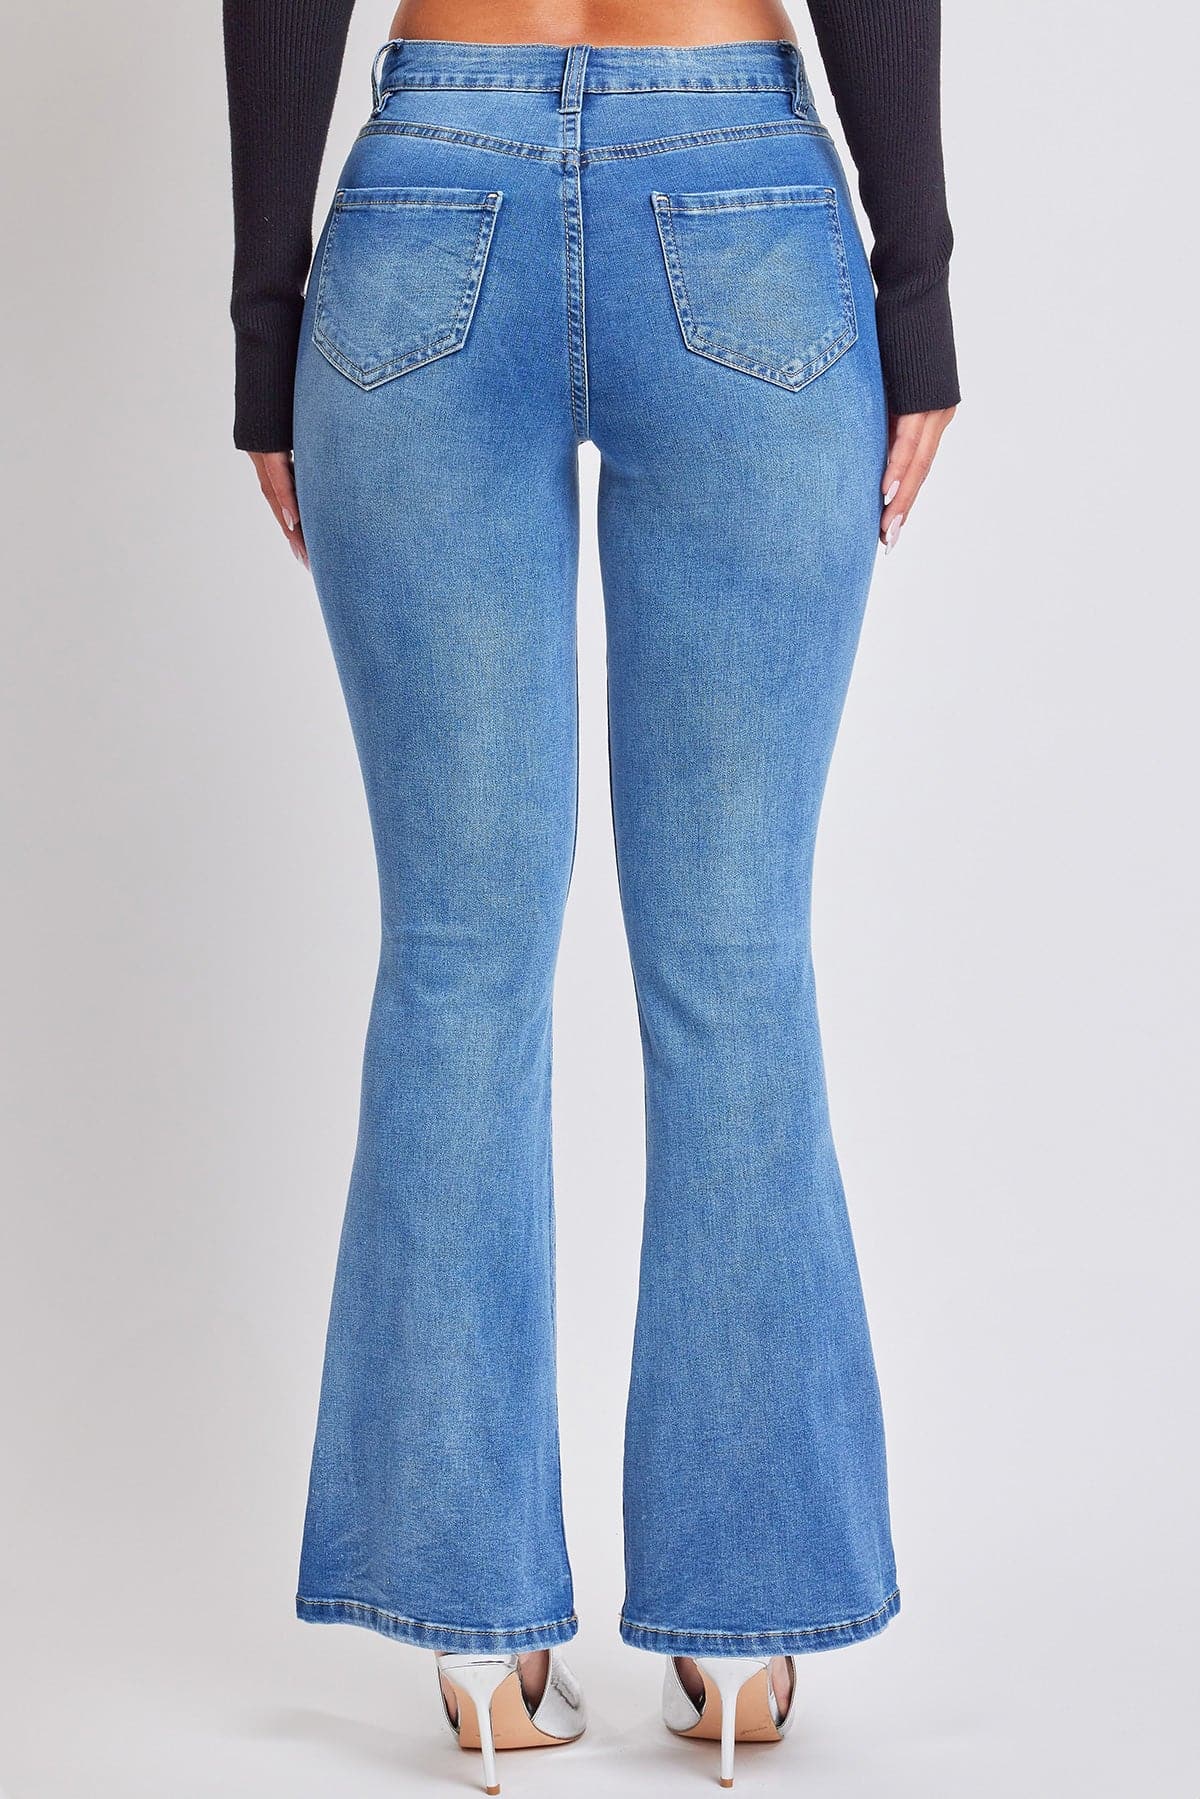 Women's Essential Distressed Flare Jeans